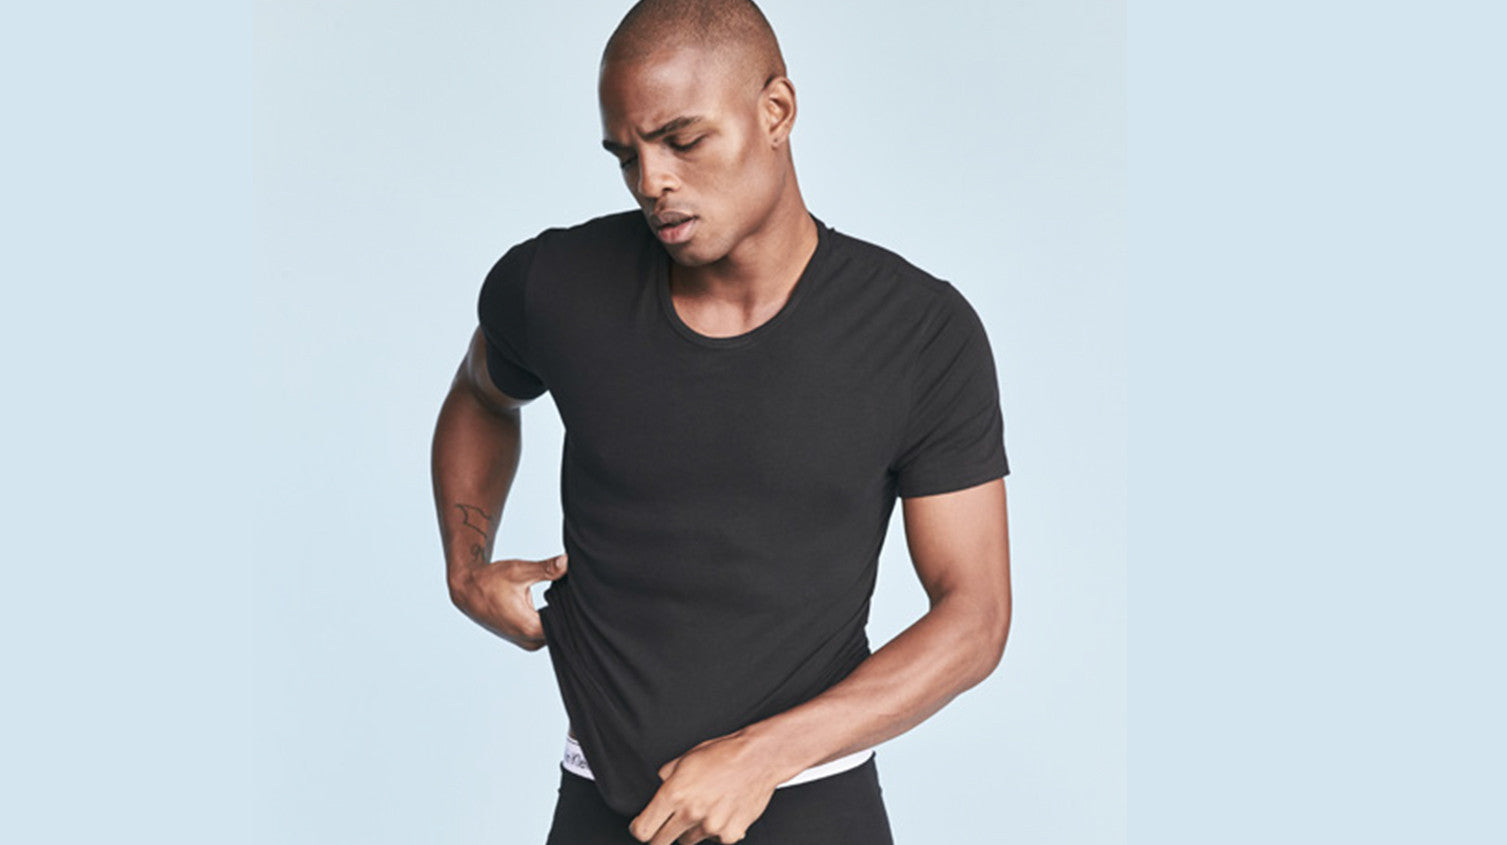 Stay Fit and Stylish with our Workout Clothes